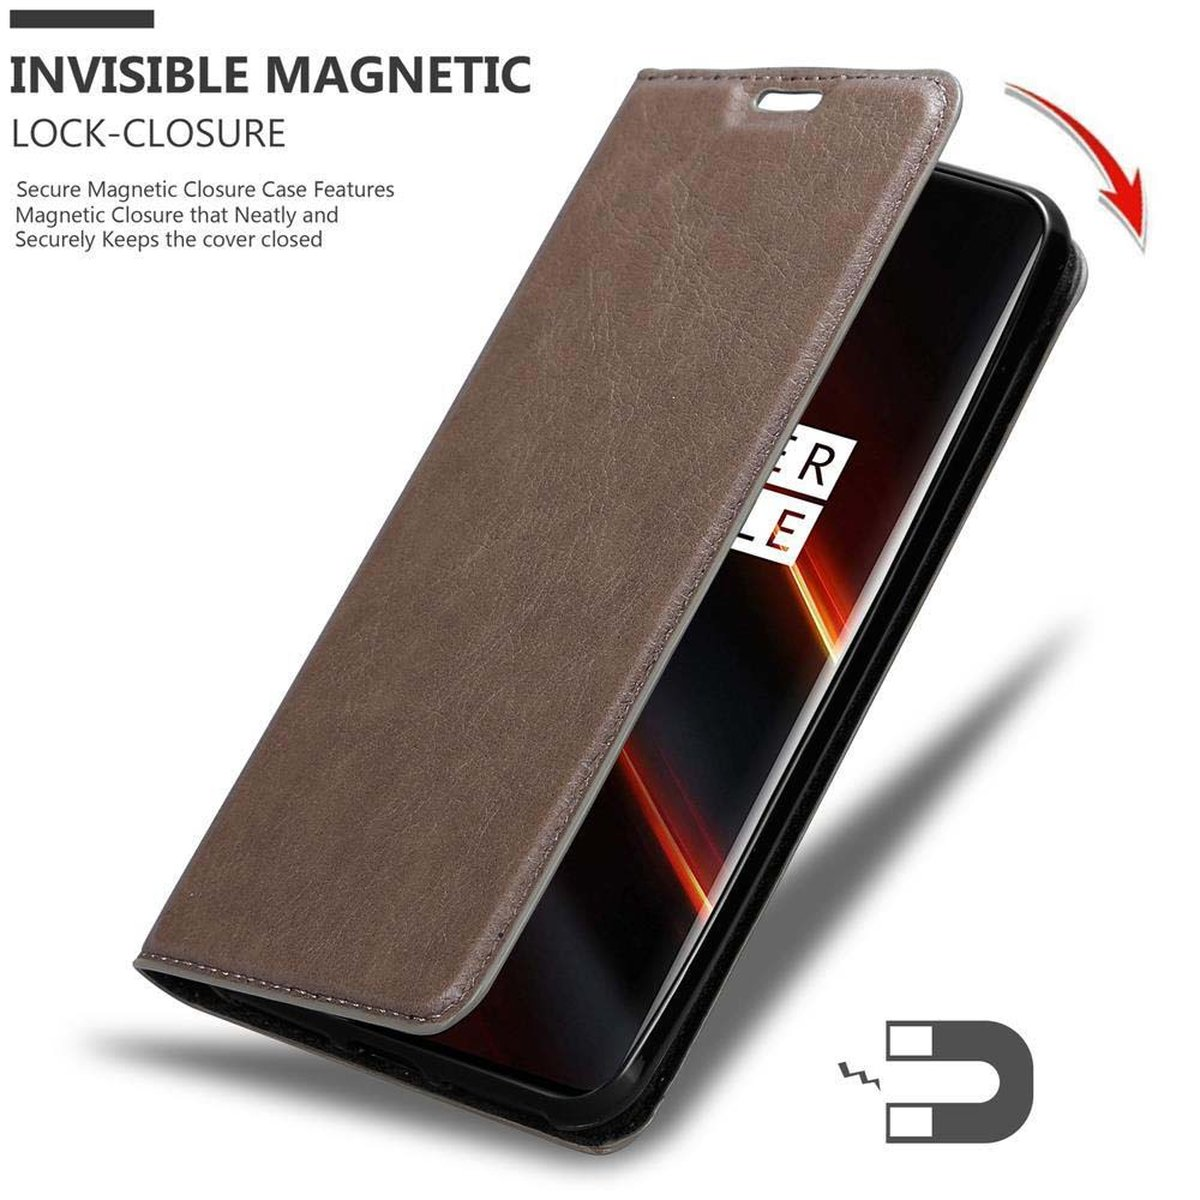 CADORABO 7T PRO, OnePlus, BRAUN Magnet, Book KAFFEE Invisible Hülle Bookcover,